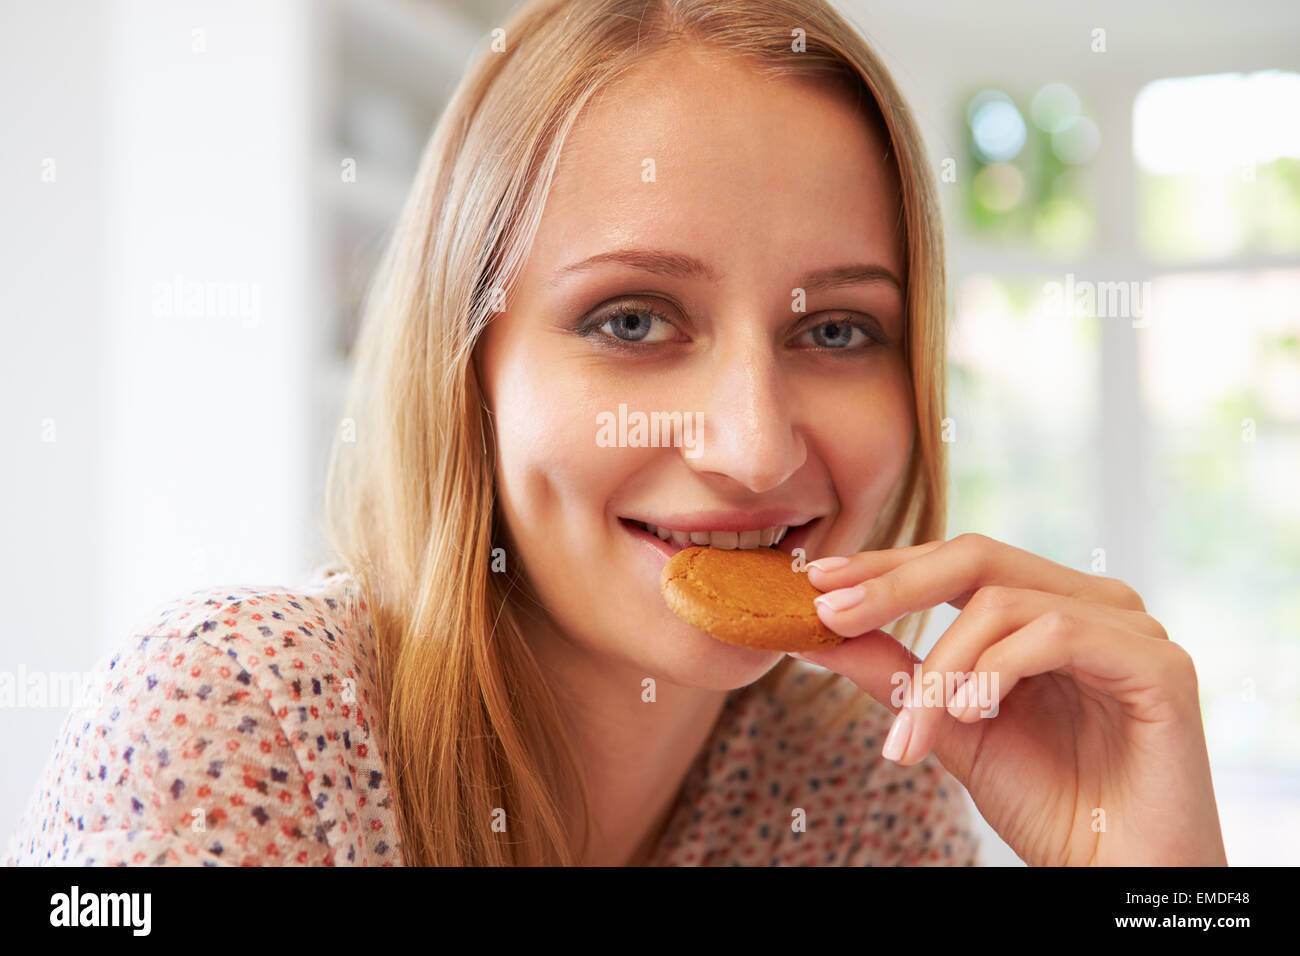 Woman Eats Ginger Biscuit To Stop Nausea Of Morning Sickness Stock Photo